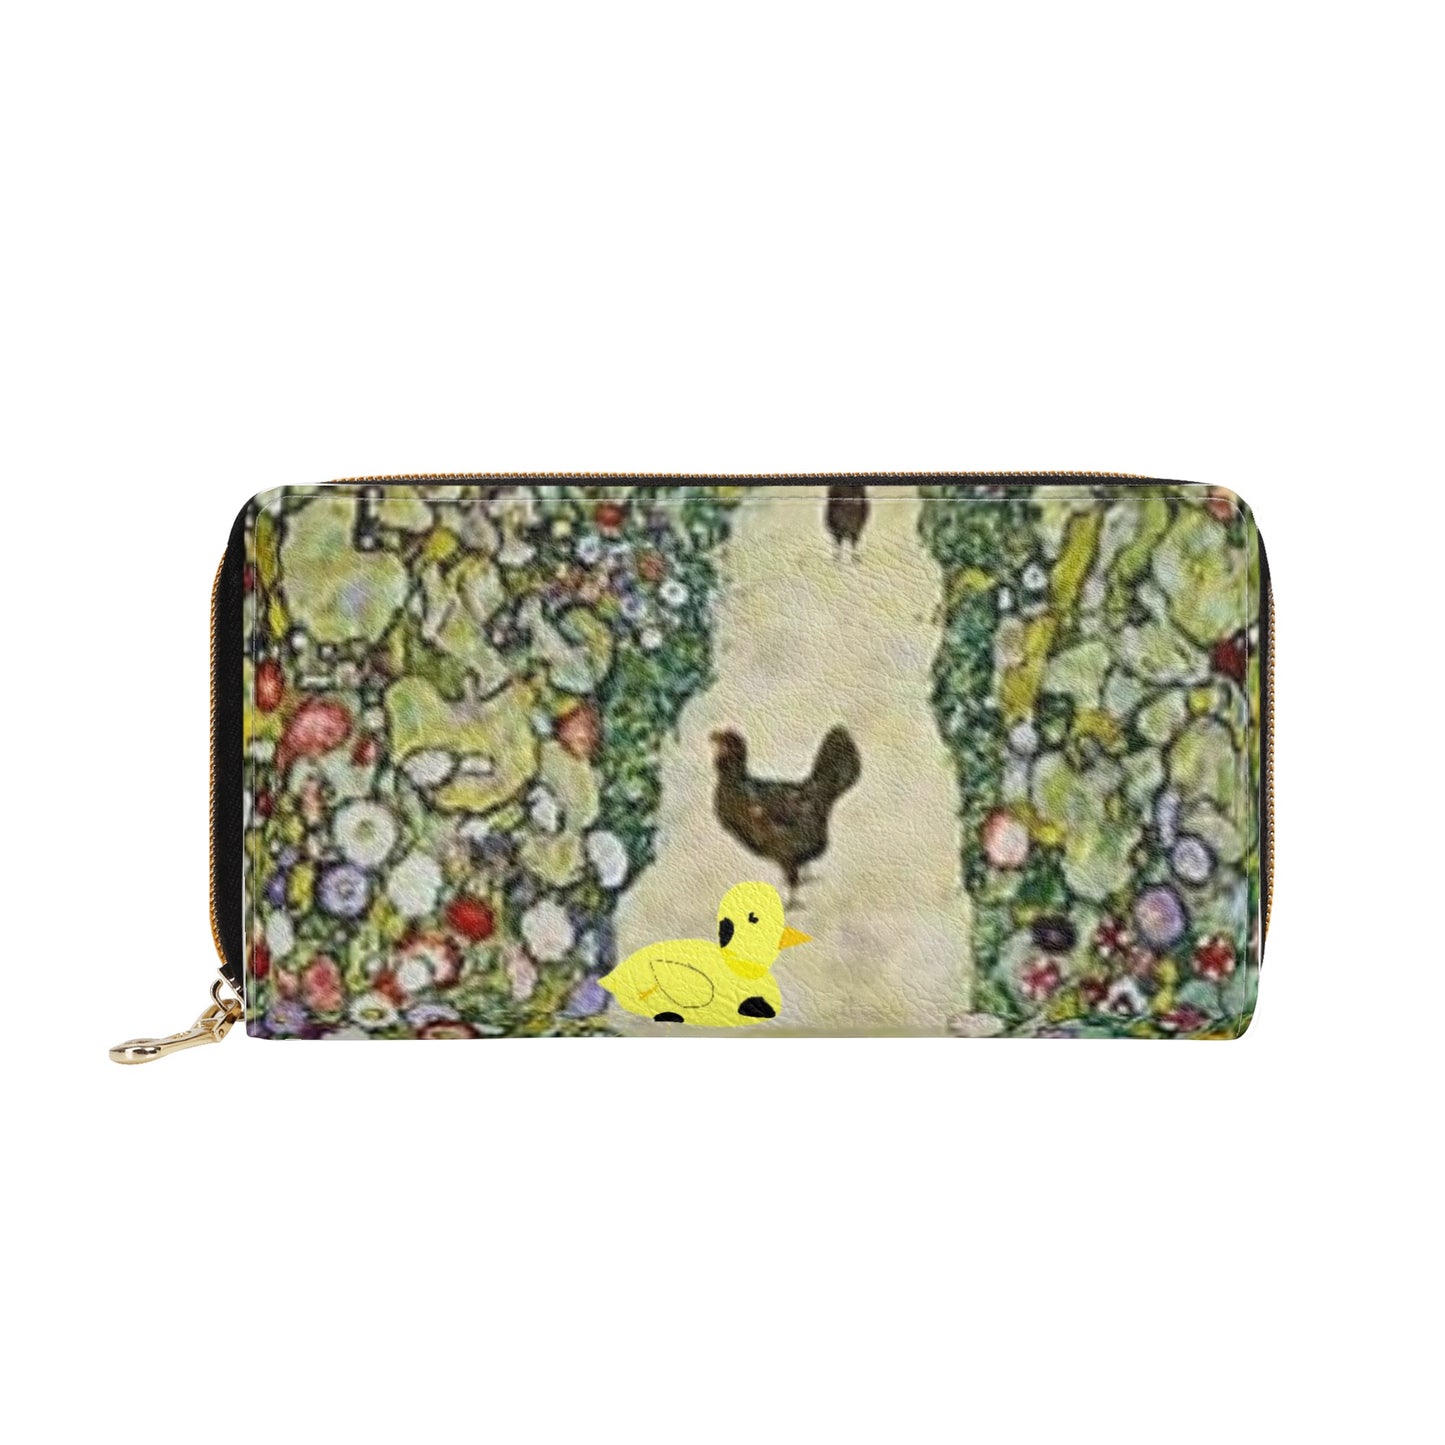 Myrtle with Gustav's Chickens by D.B. Vegan Friendly PU Wallet/Purse